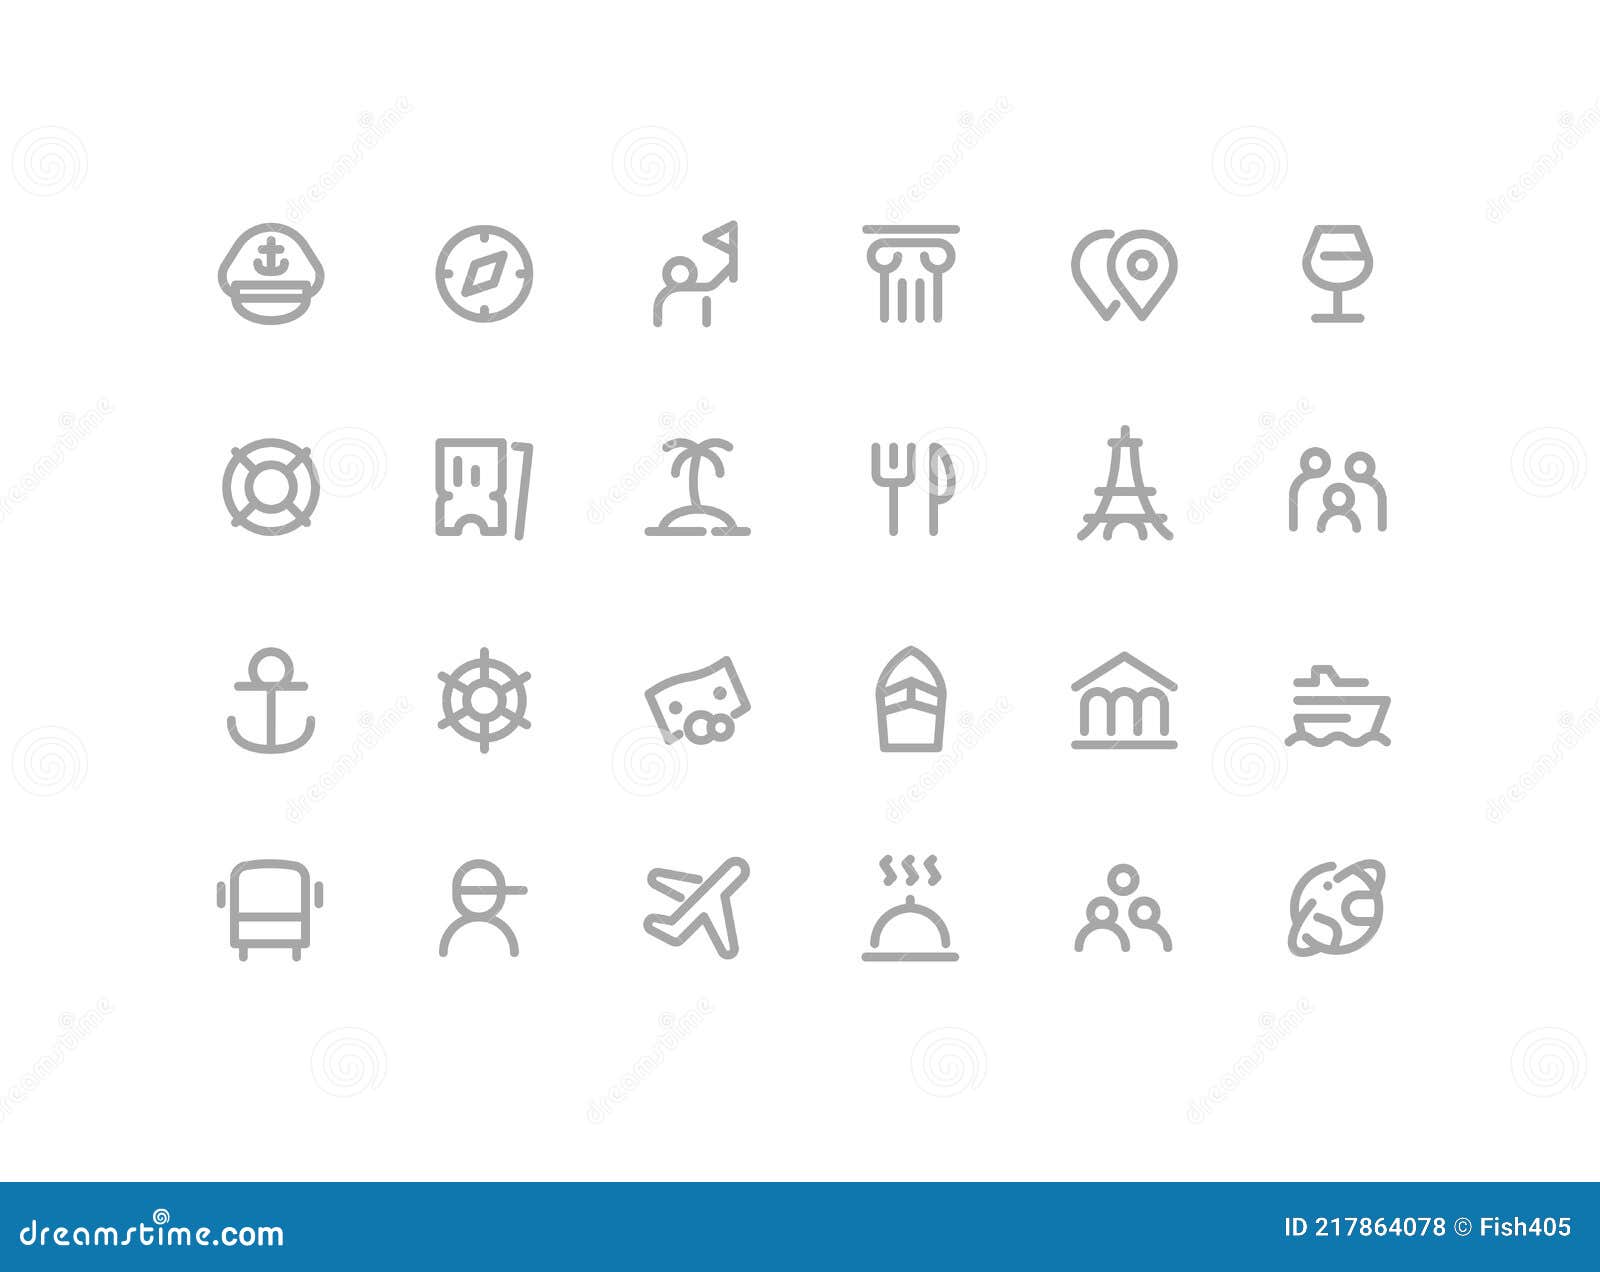 premium icons pack on travel and tourism, cruise options, tour. such line signs as guide, flights, excursions, beach